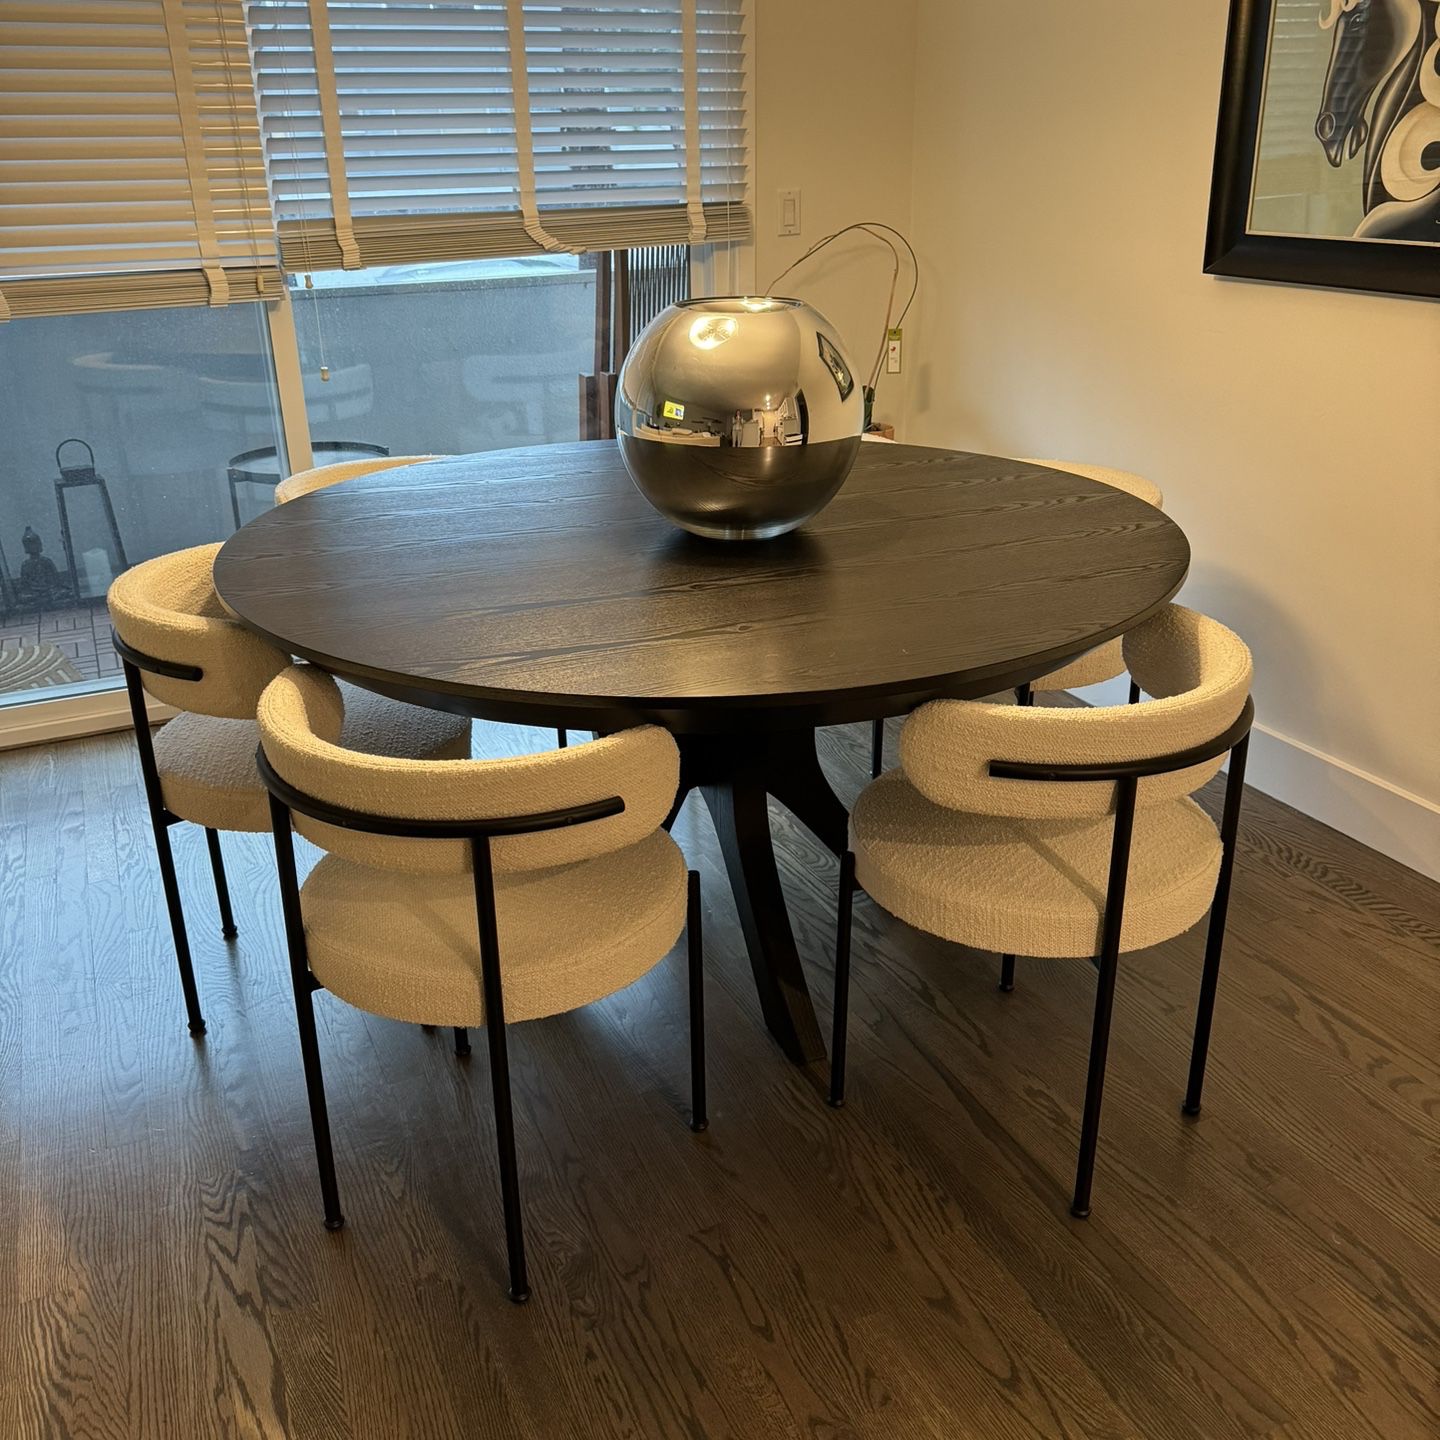 New 72” Palma Dining Table